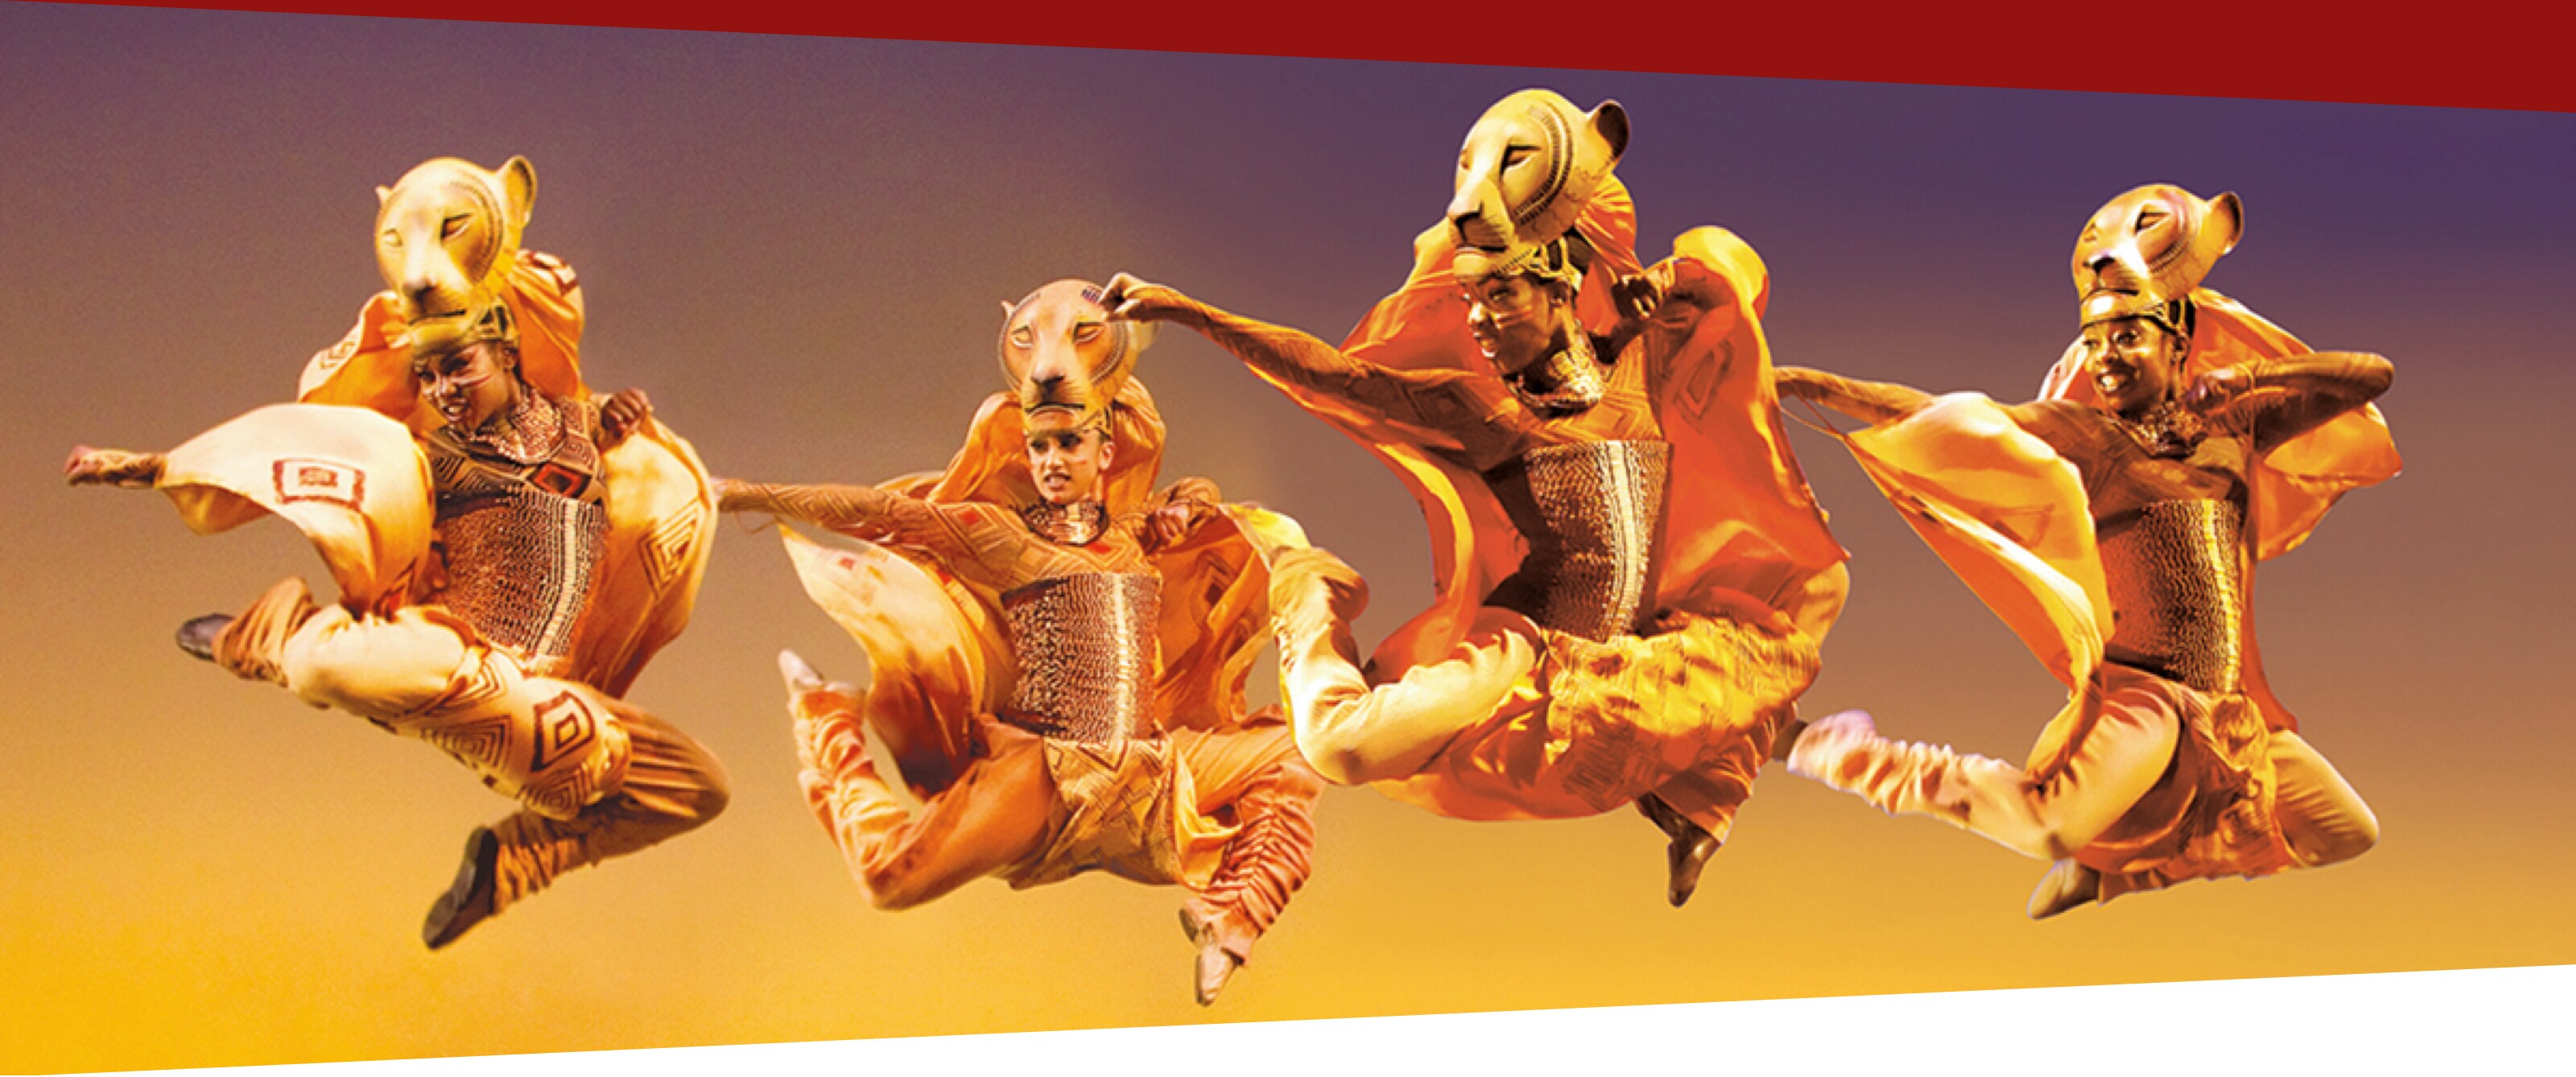 Stills from the The Lion King stage show featuring giraffes, Rafiki and the Lionesses hunt